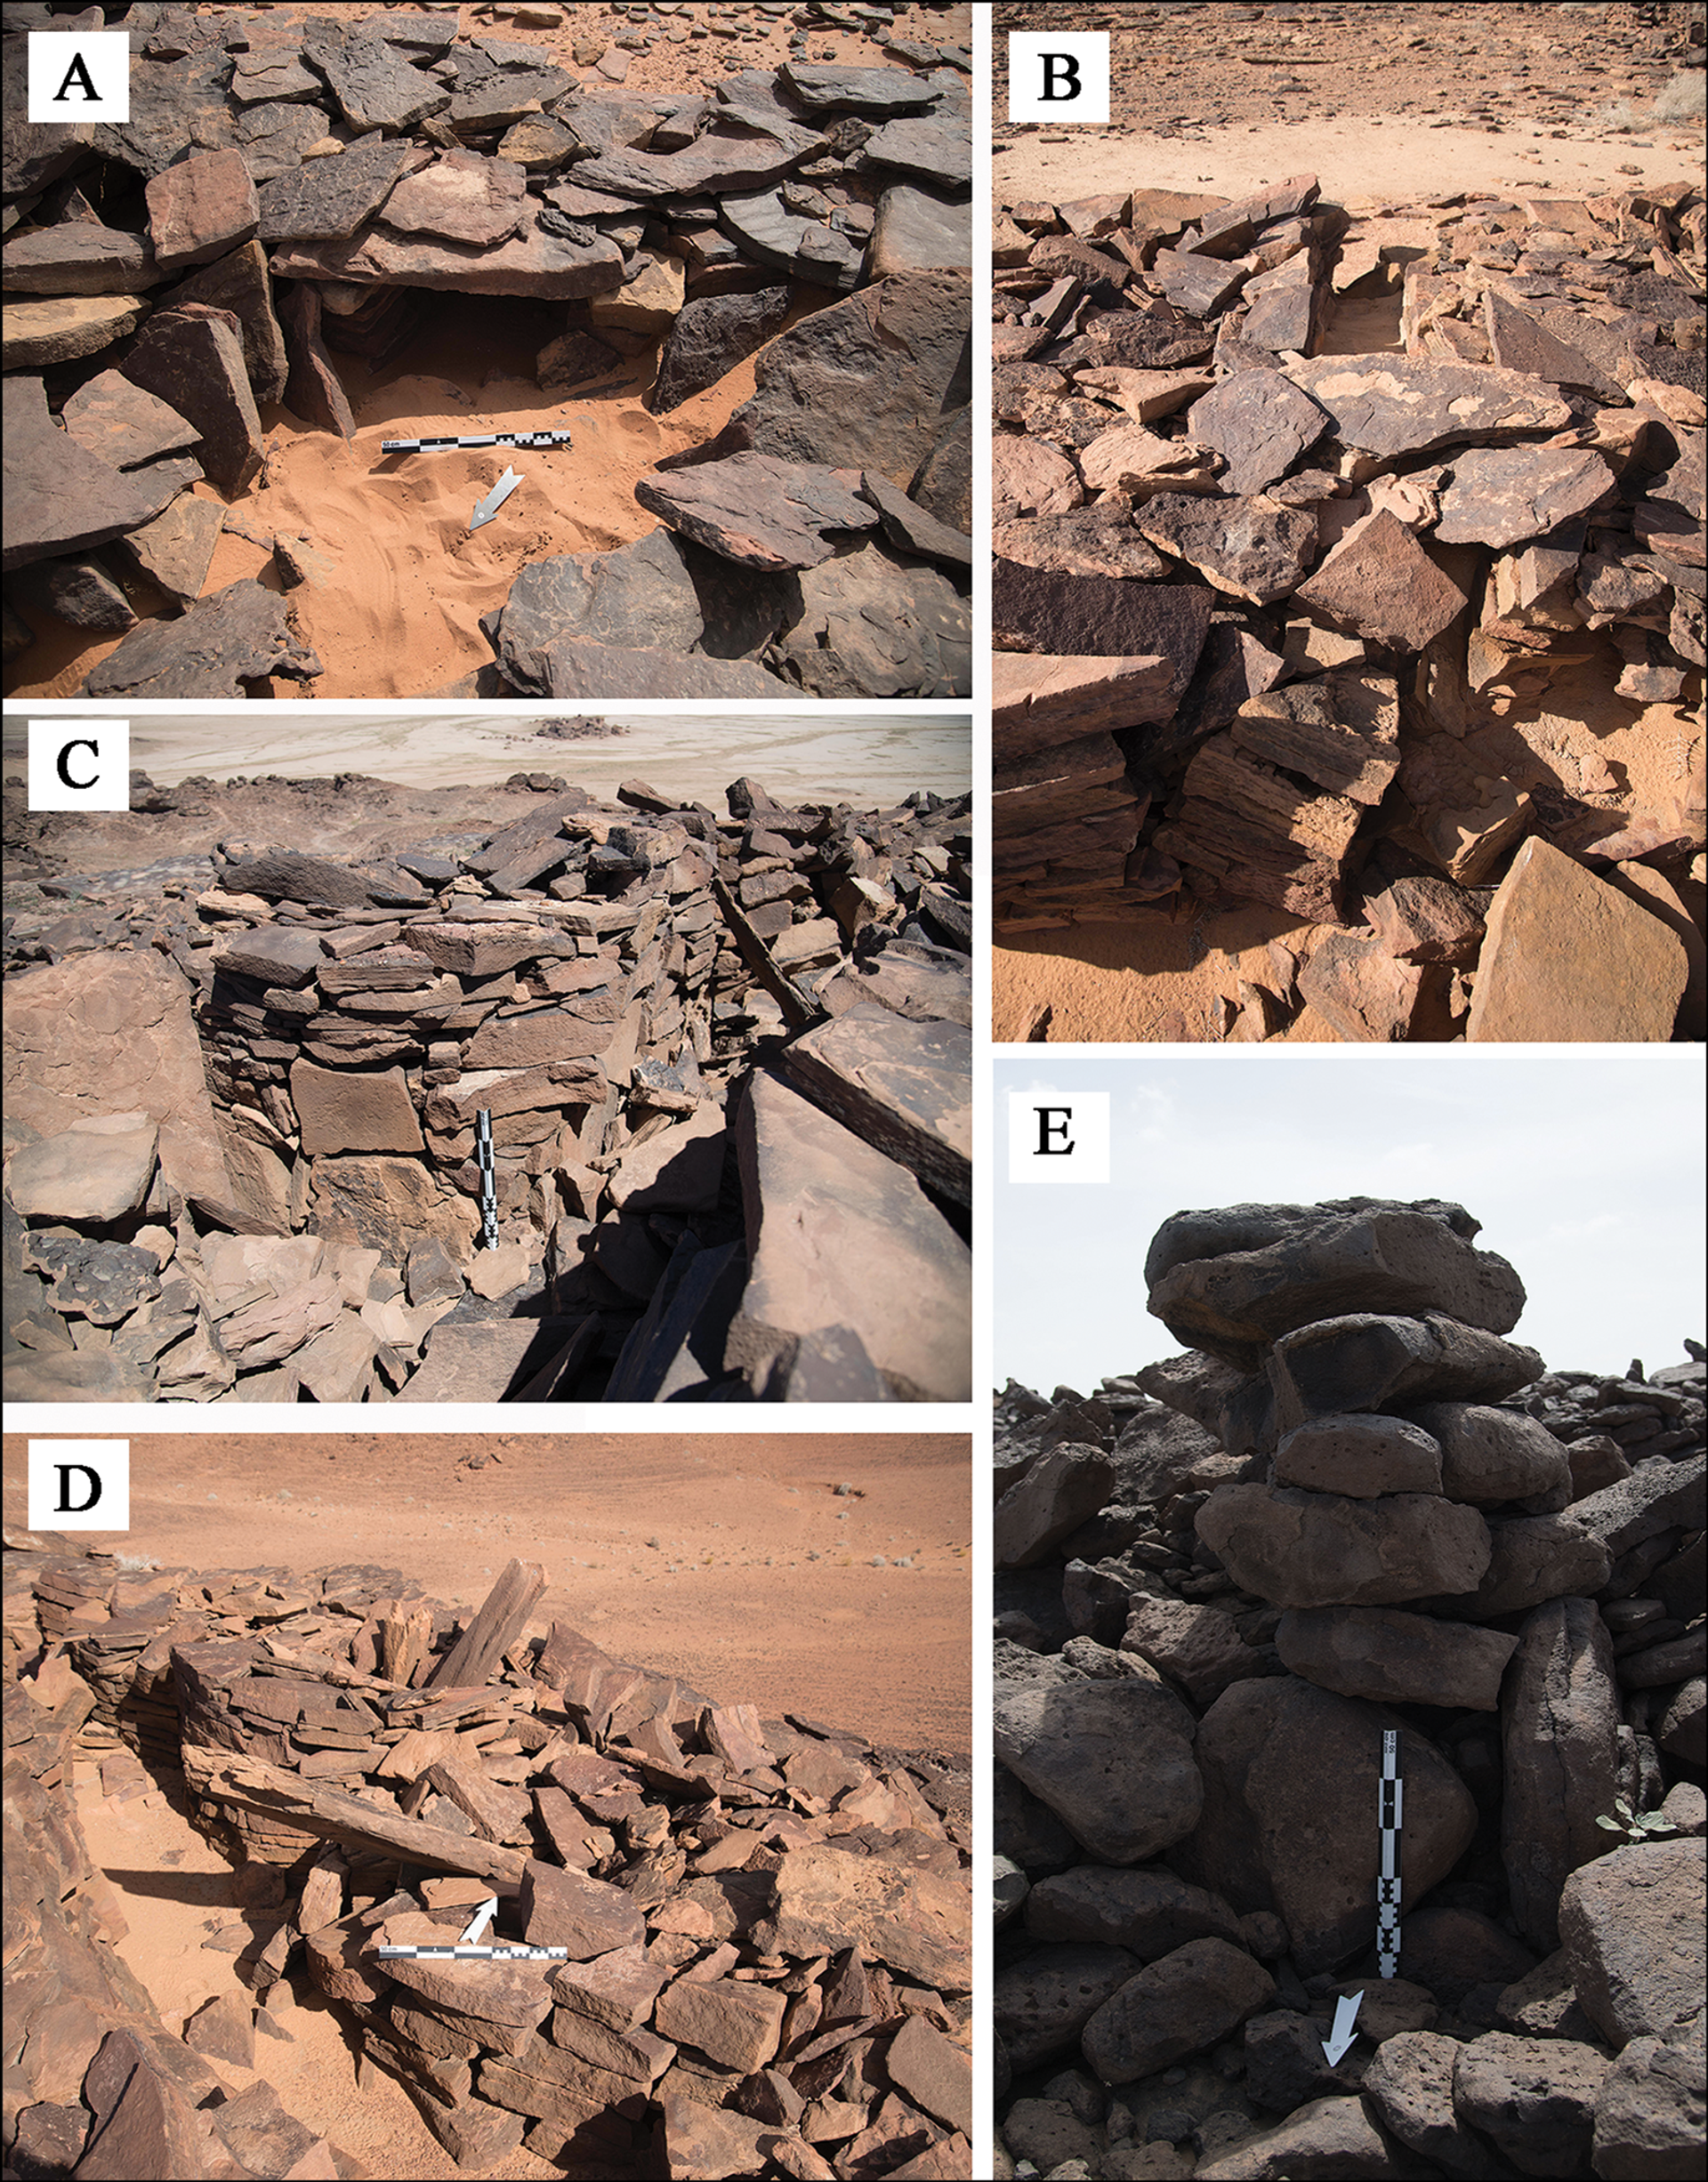 7,000-Year-Old Structures in Saudi Desert Show 'Earliest Evidence for Cattle Cult', Scientists Say - Sputnik International, 1920, 01.05.2021